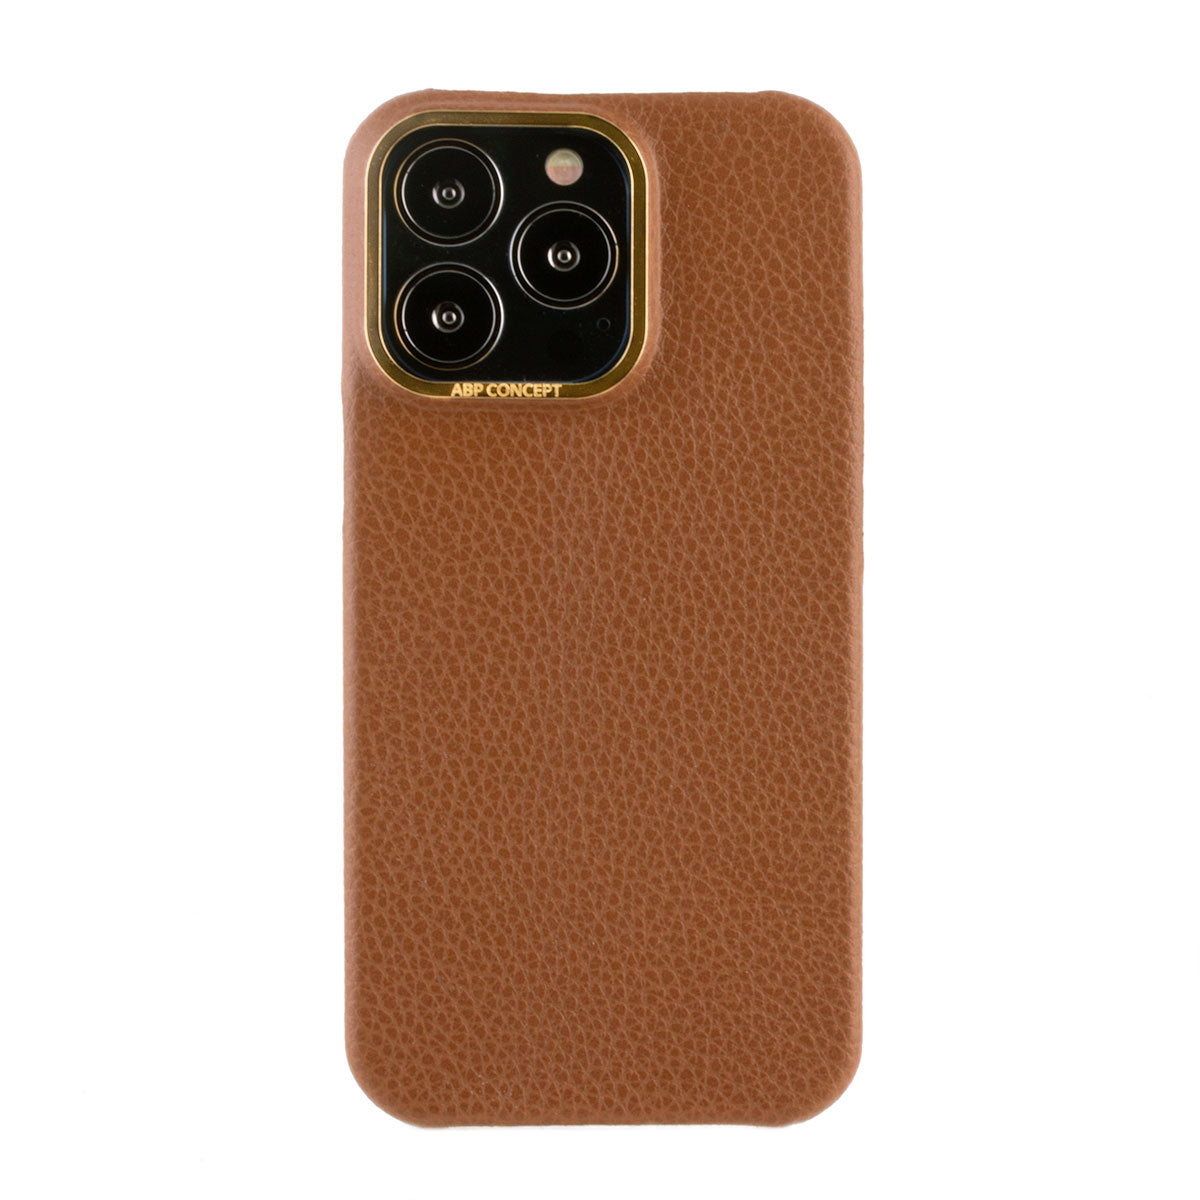 Tribute to Expo 2020 Dubai - Leather iPhone case - iPhone 13 & 12 ( Pro / Max ) - Brown alligator and buffalo